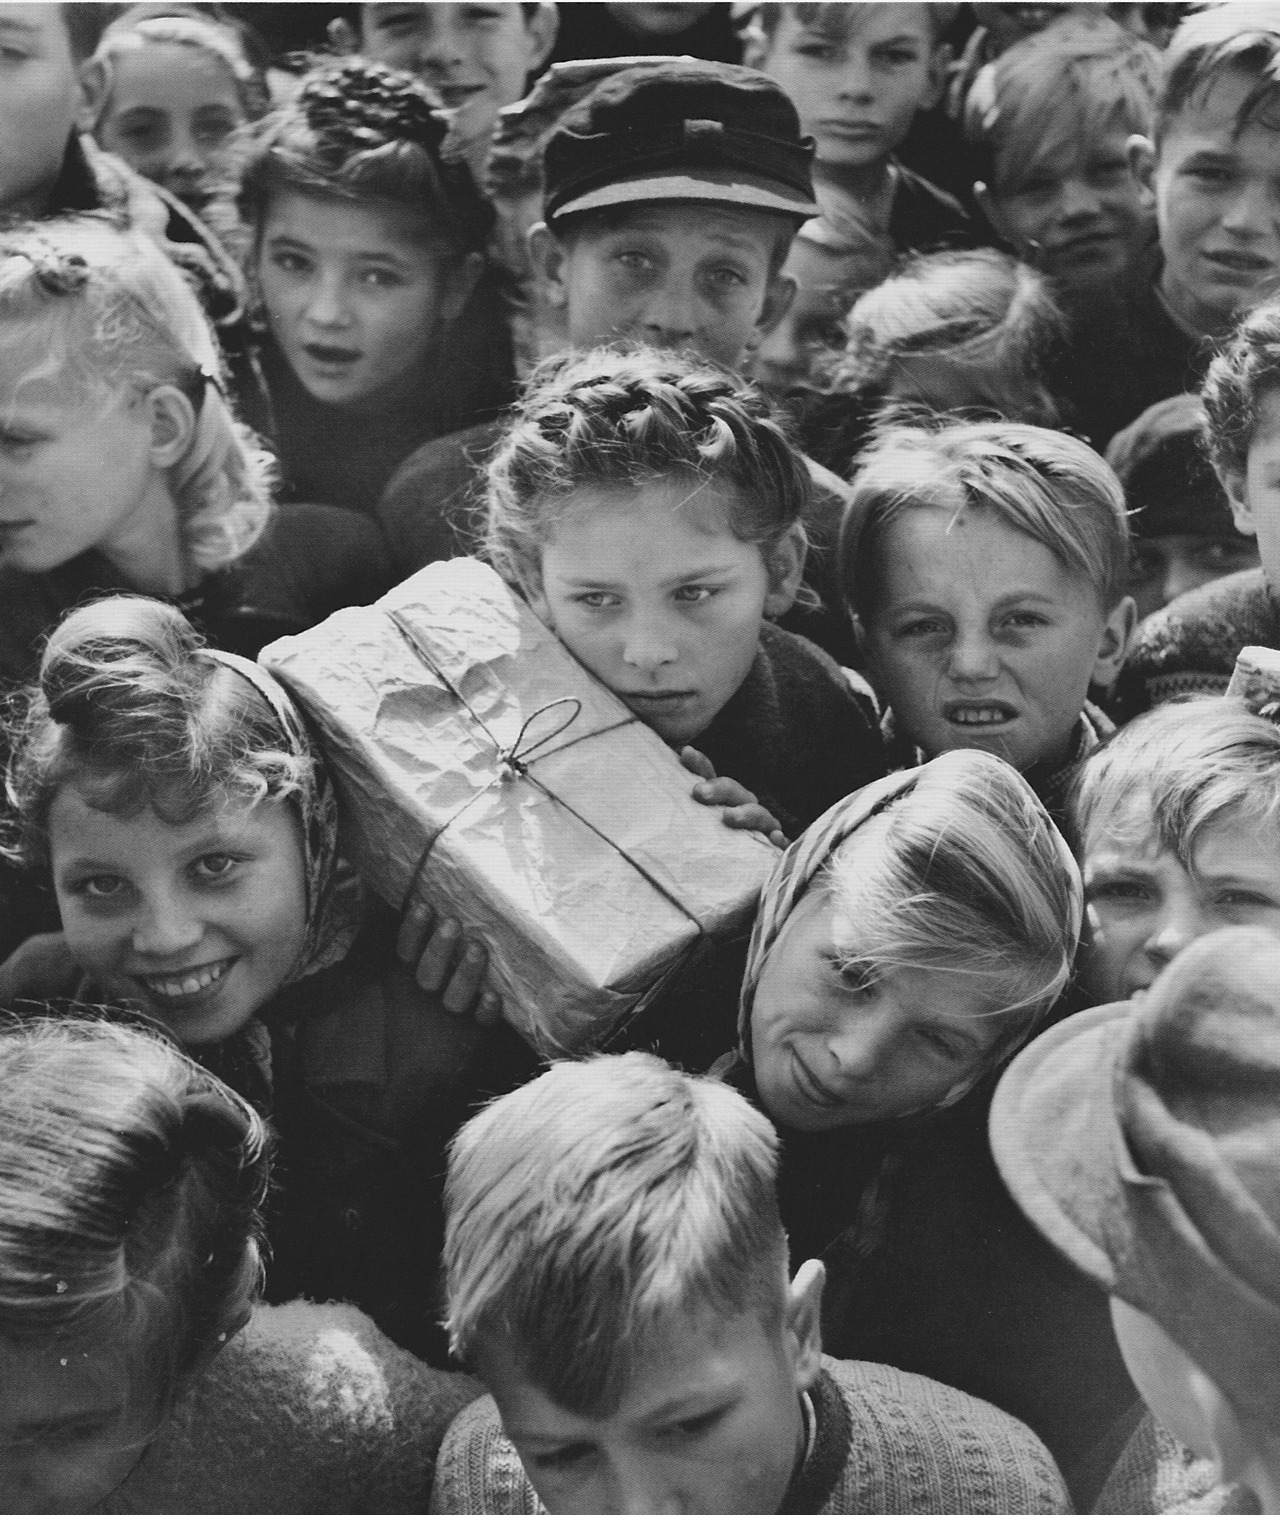 Hank Walker, Children with gifts from the Berlin Airlift, 1948.